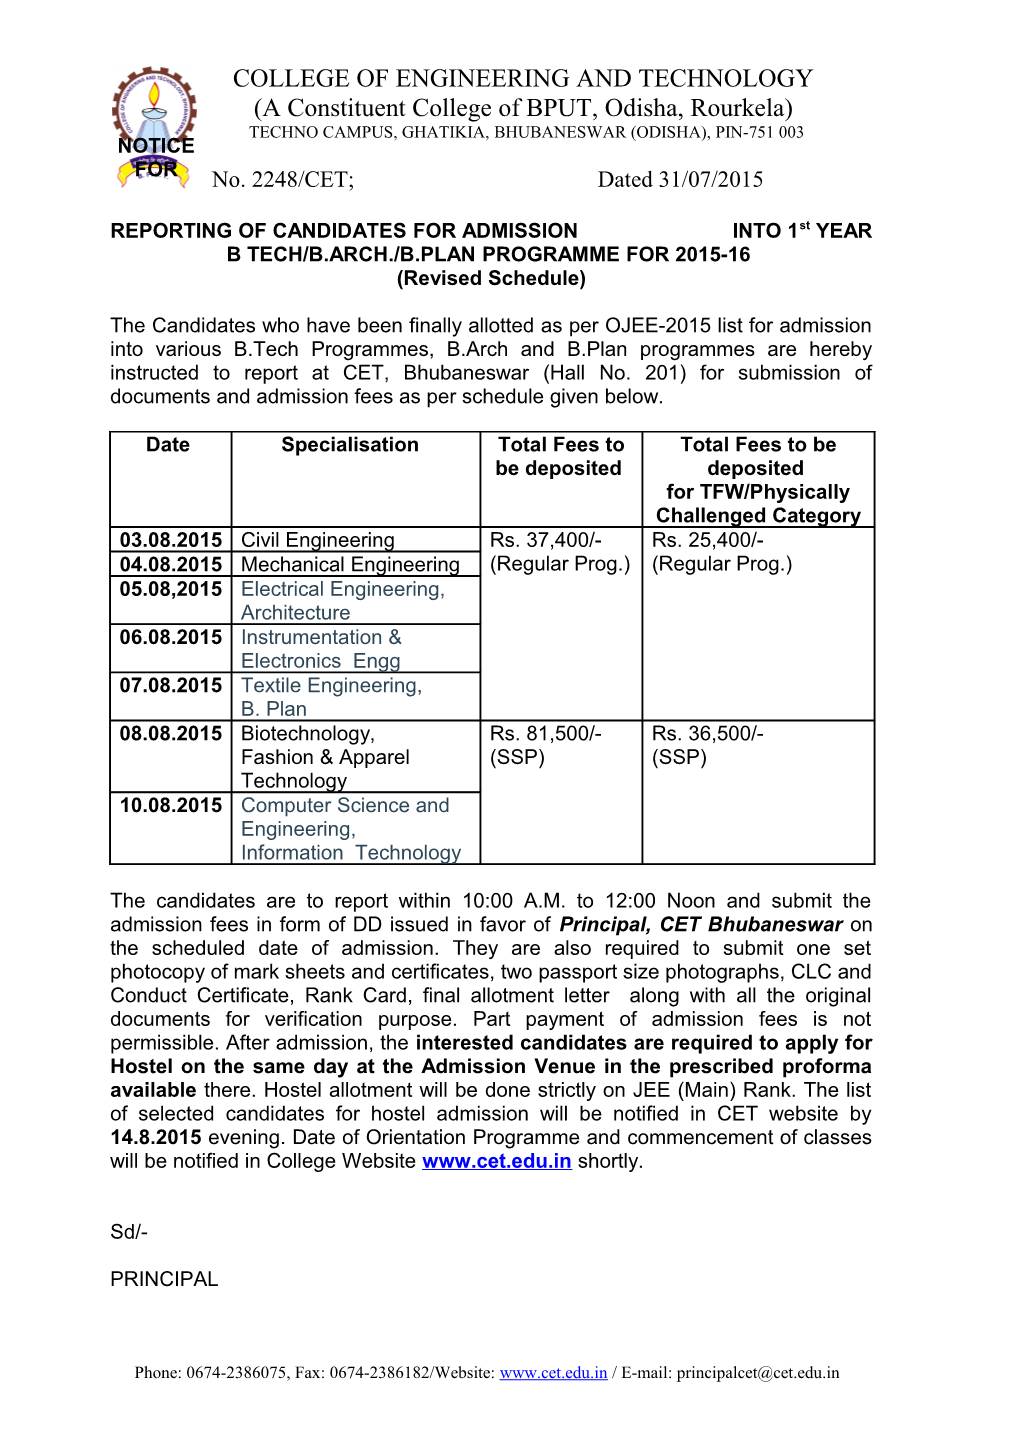 NOTICE for REPORTING of CANDIDATES for ADMISSION INTO 1St YEAR B TECH/B.ARCH./B.PLAN PROGRAMME